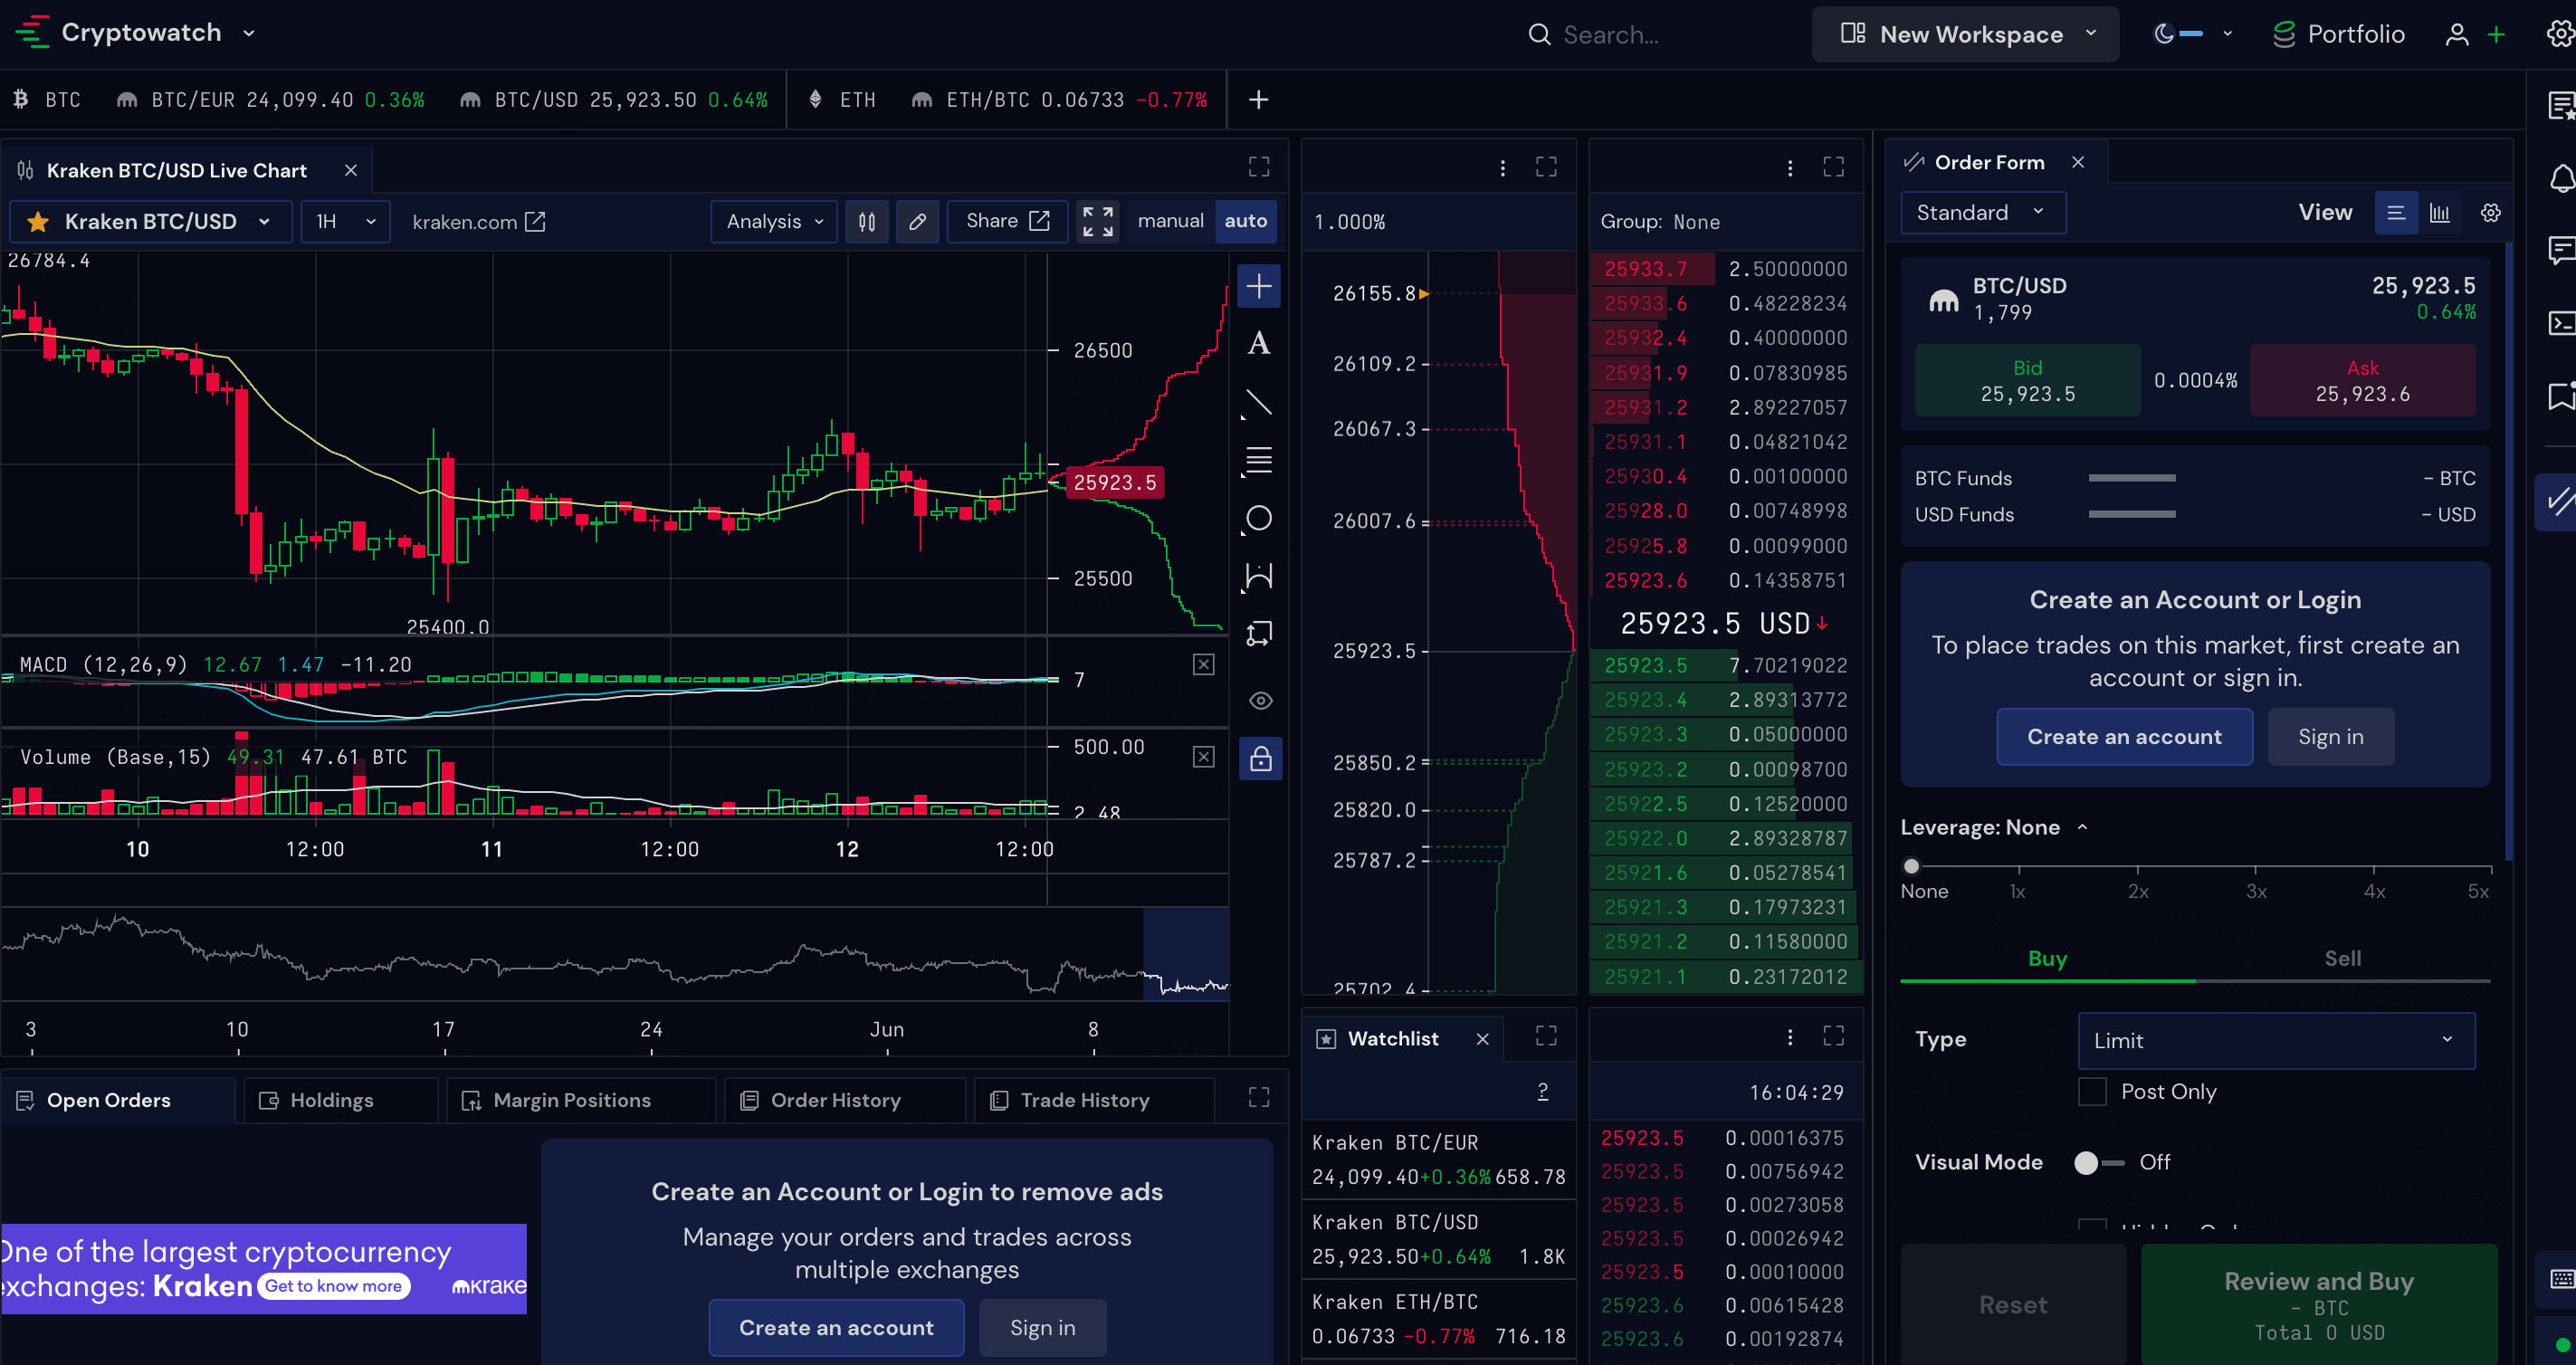 11. A Comprehensive Crypto Charting Tool: CryptoWat.ch